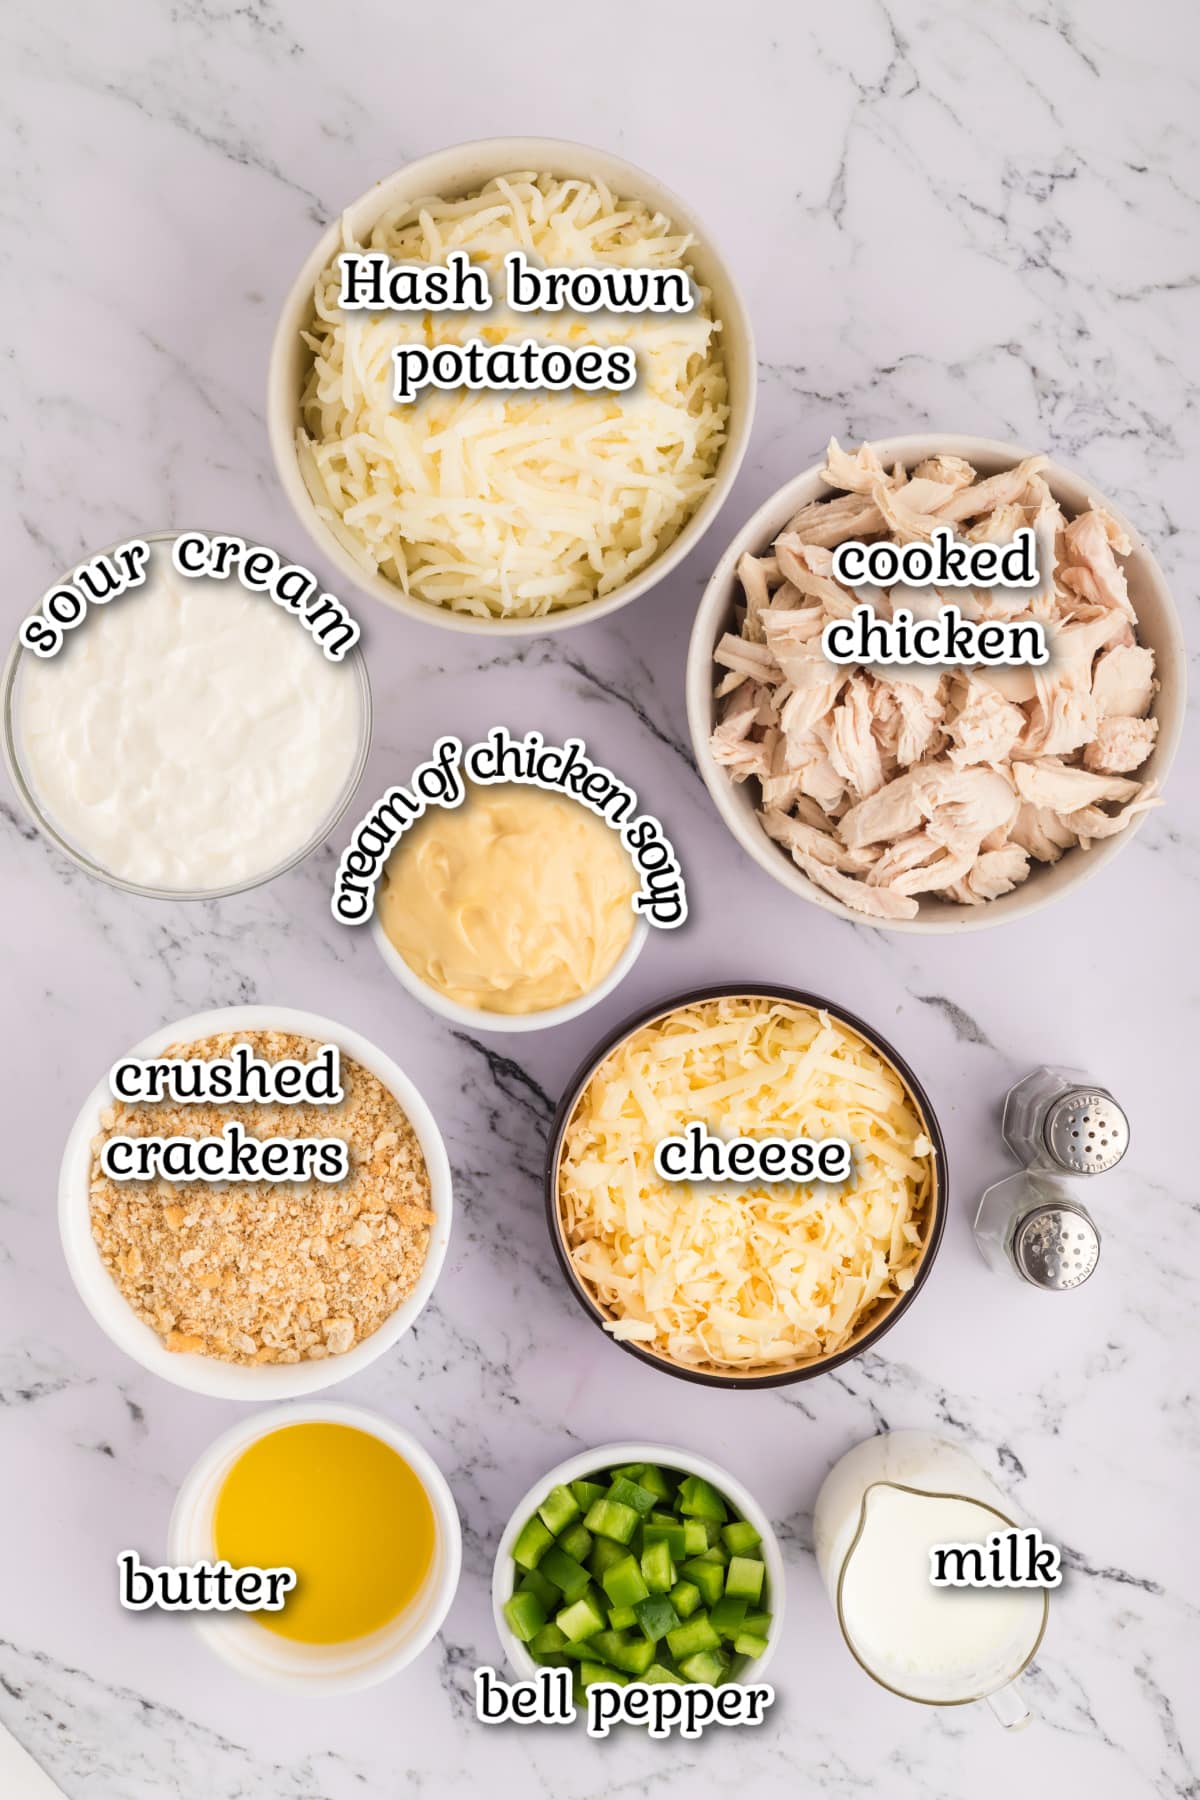 An overhead image of the recipe ingredients with text overlay.